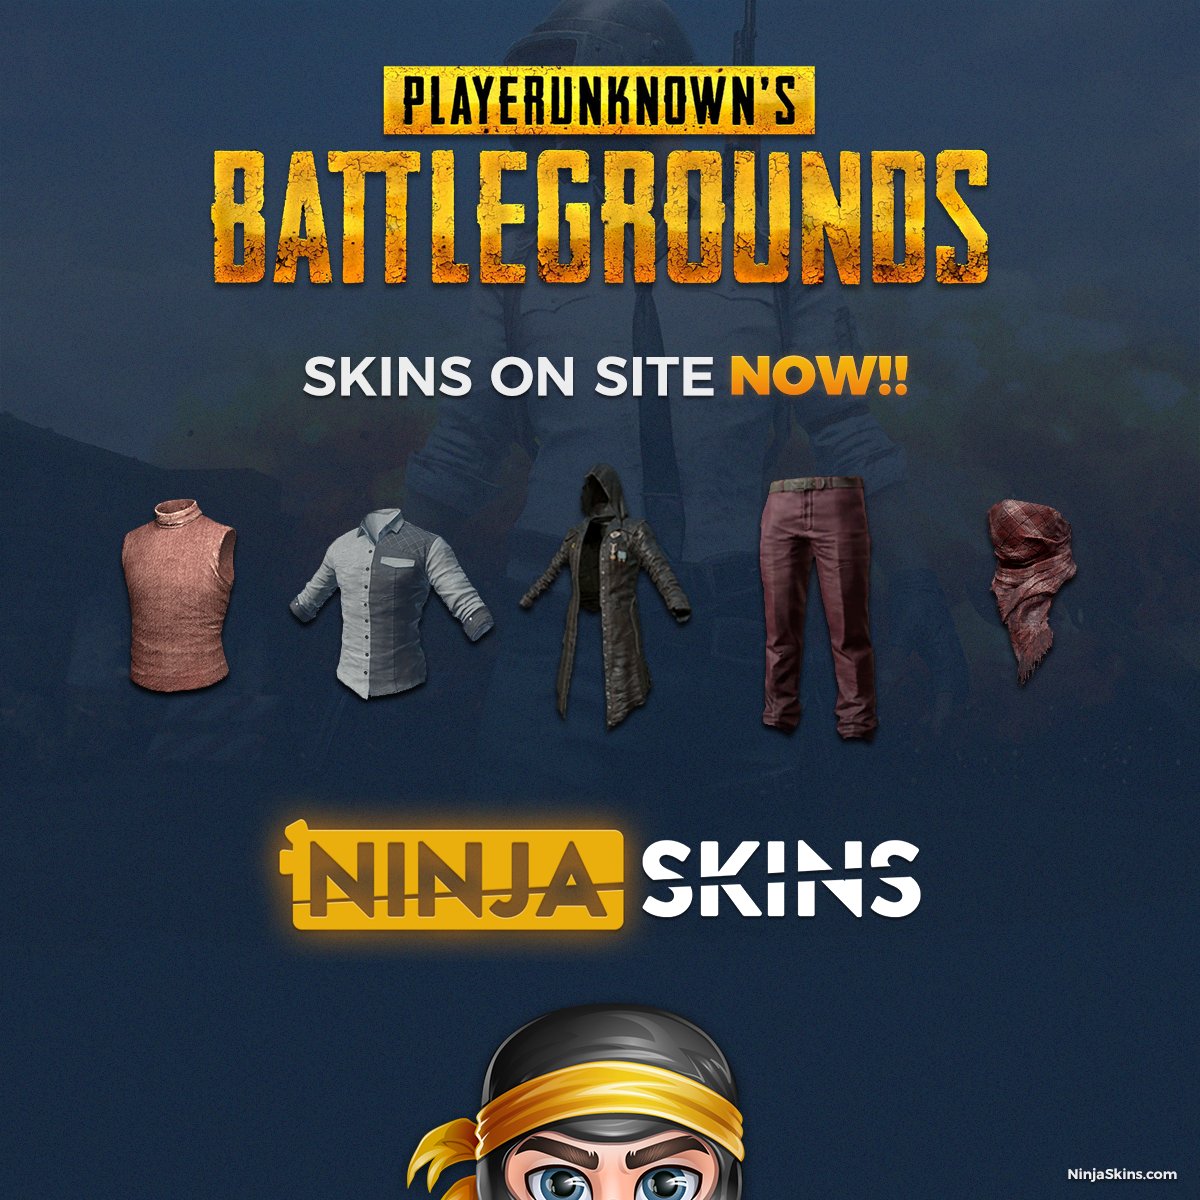 Ninjaskins Com Fever Time Deposit Win Withdraw Come Beat The Ninja For Some Chicken Dinner Pubgskins Pubg Pubgiveaway Csgo Csgogiveway Pubg Skins Are In Stock T Co X33u6h1rzv T Co Ygcd6nwfke